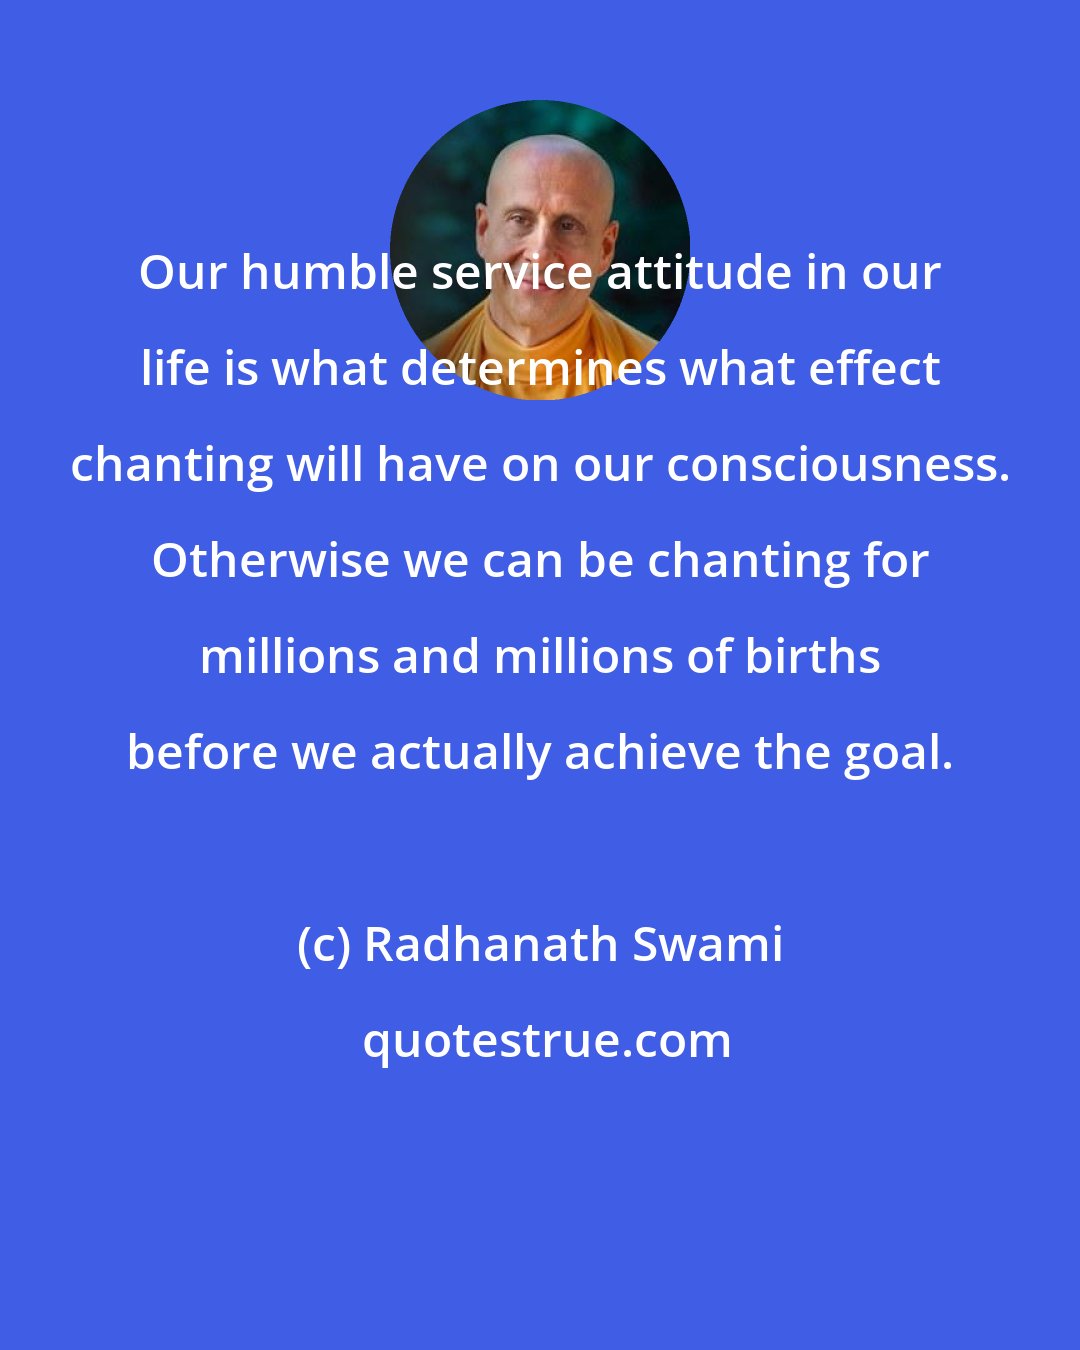 Radhanath Swami: Our humble service attitude in our life is what determines what effect chanting will have on our consciousness. Otherwise we can be chanting for millions and millions of births before we actually achieve the goal.